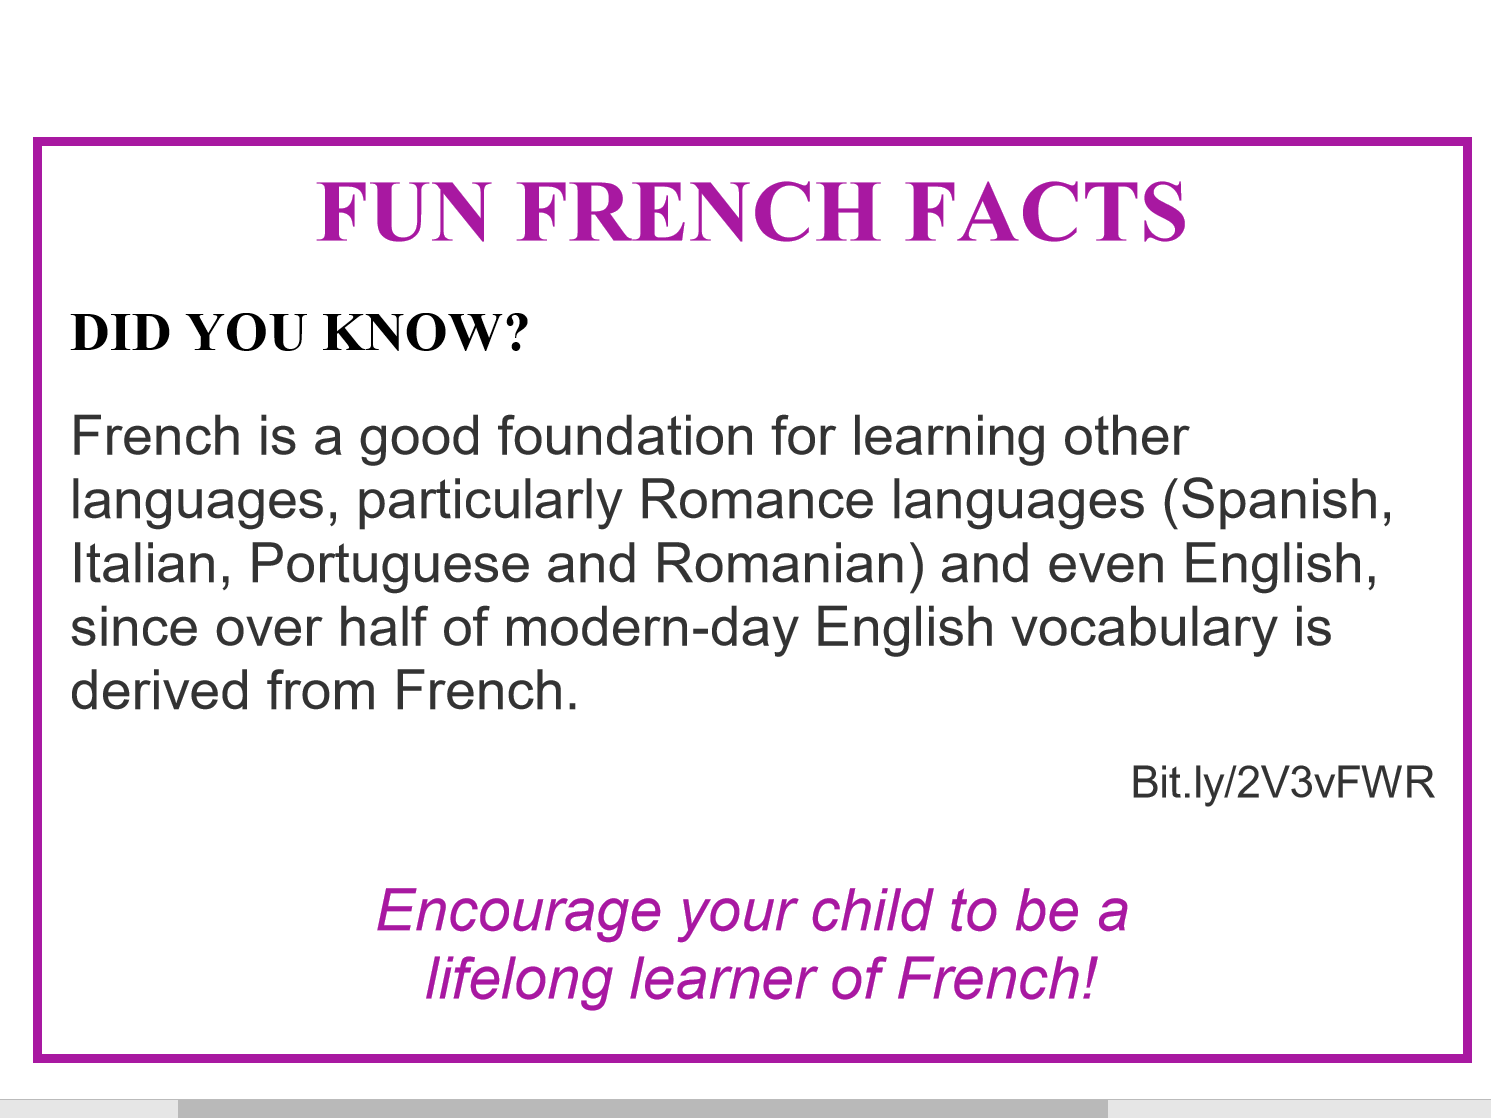 Revised Fun French Fact May 2019.png